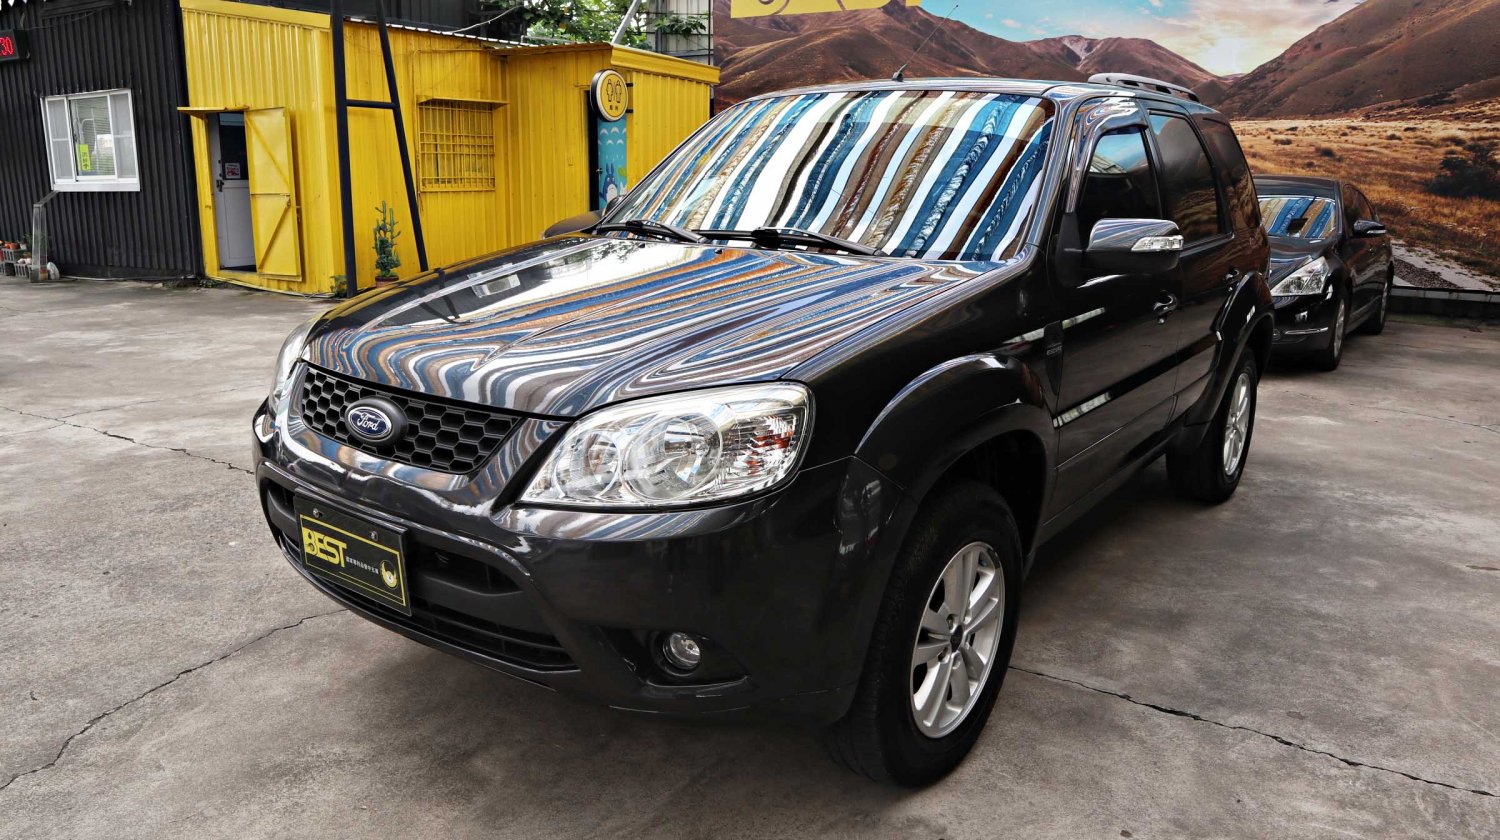 Ford 福特 ／ Escape ／ 2010年 ／ 2010年 Ford Escape 灰色 福特中古休旅車 ／ 成交區